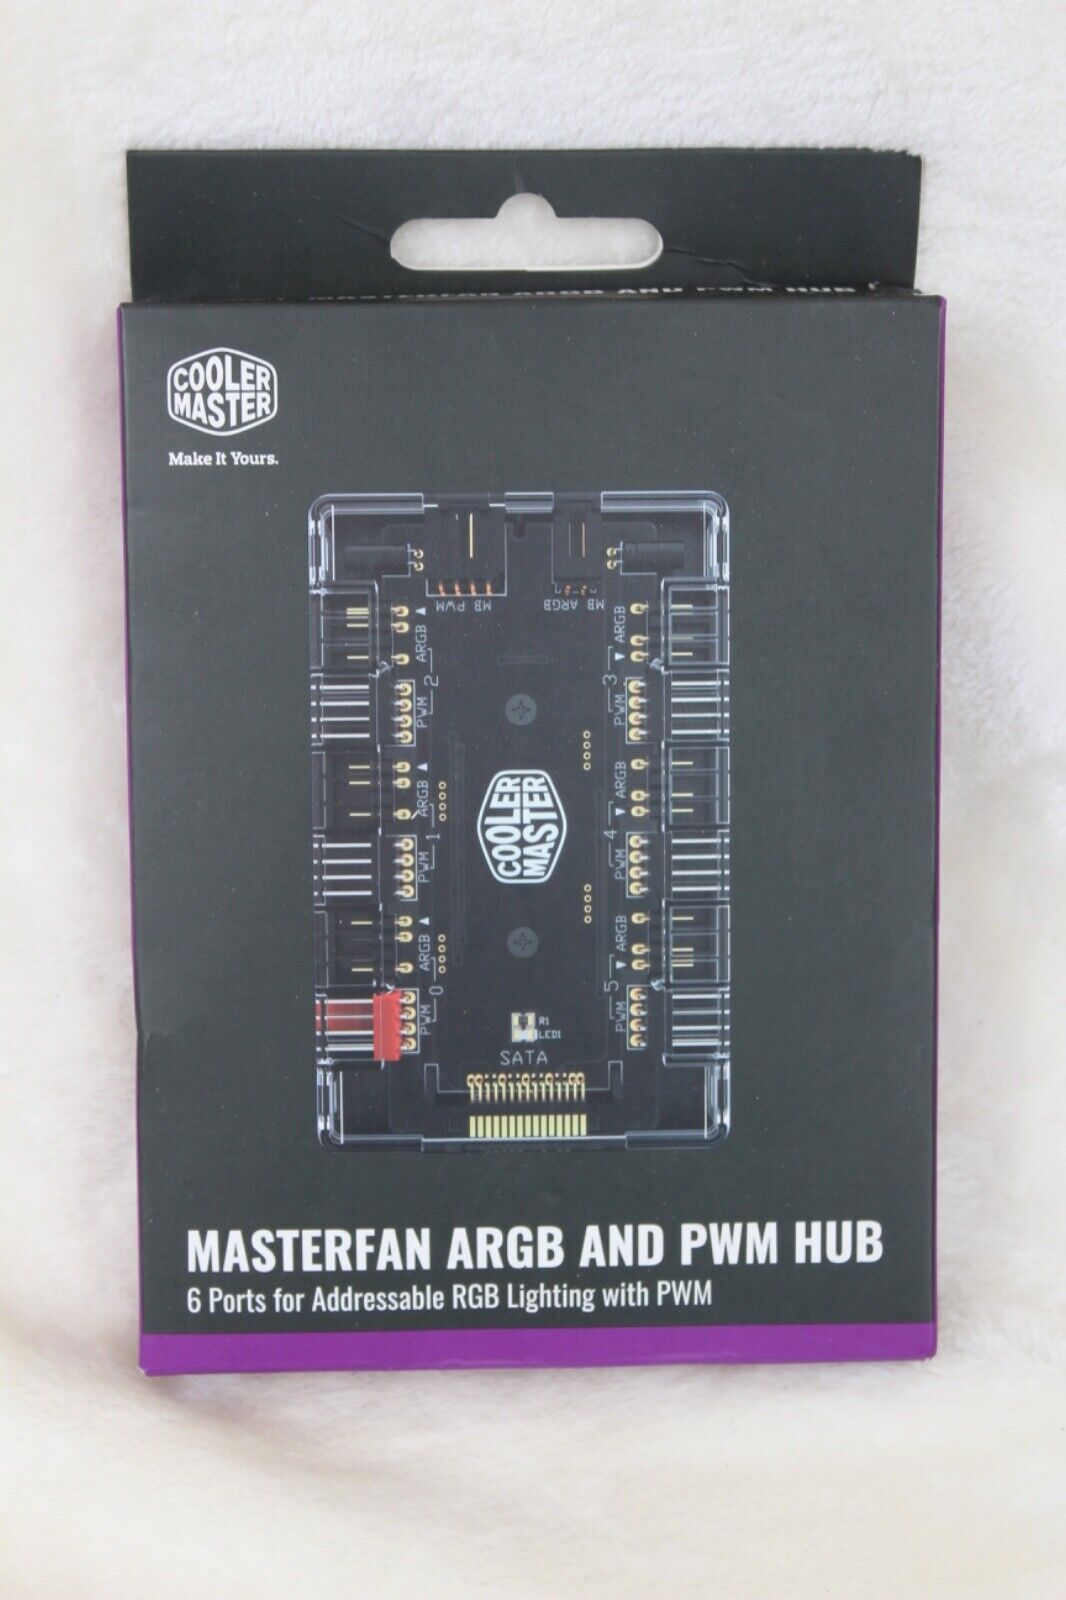 Cooler Master MASTERFAN 1 to 6 ARGB/PWM Hub with 6 Ports for ARGB Light and PWM